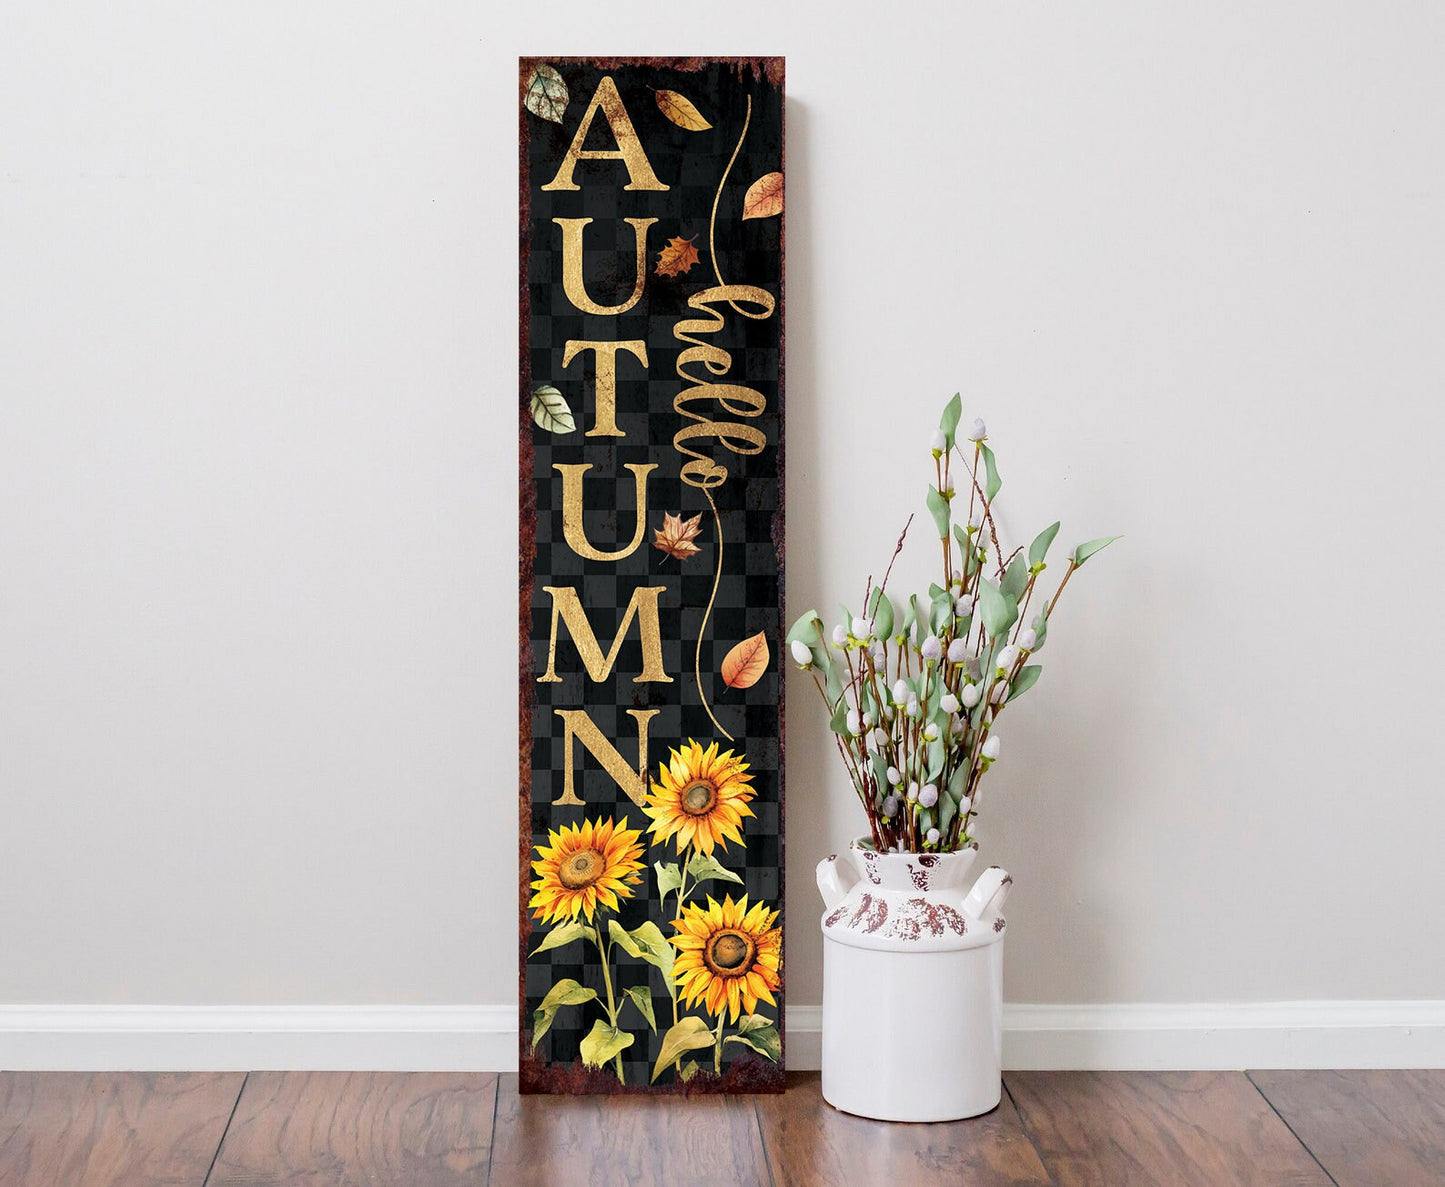 36in Hello Autumn Porch Sign - Front Porch Fall Welcome Sign with Vintage Autumn Decoration, Rustic Modern Farmhouse Decor